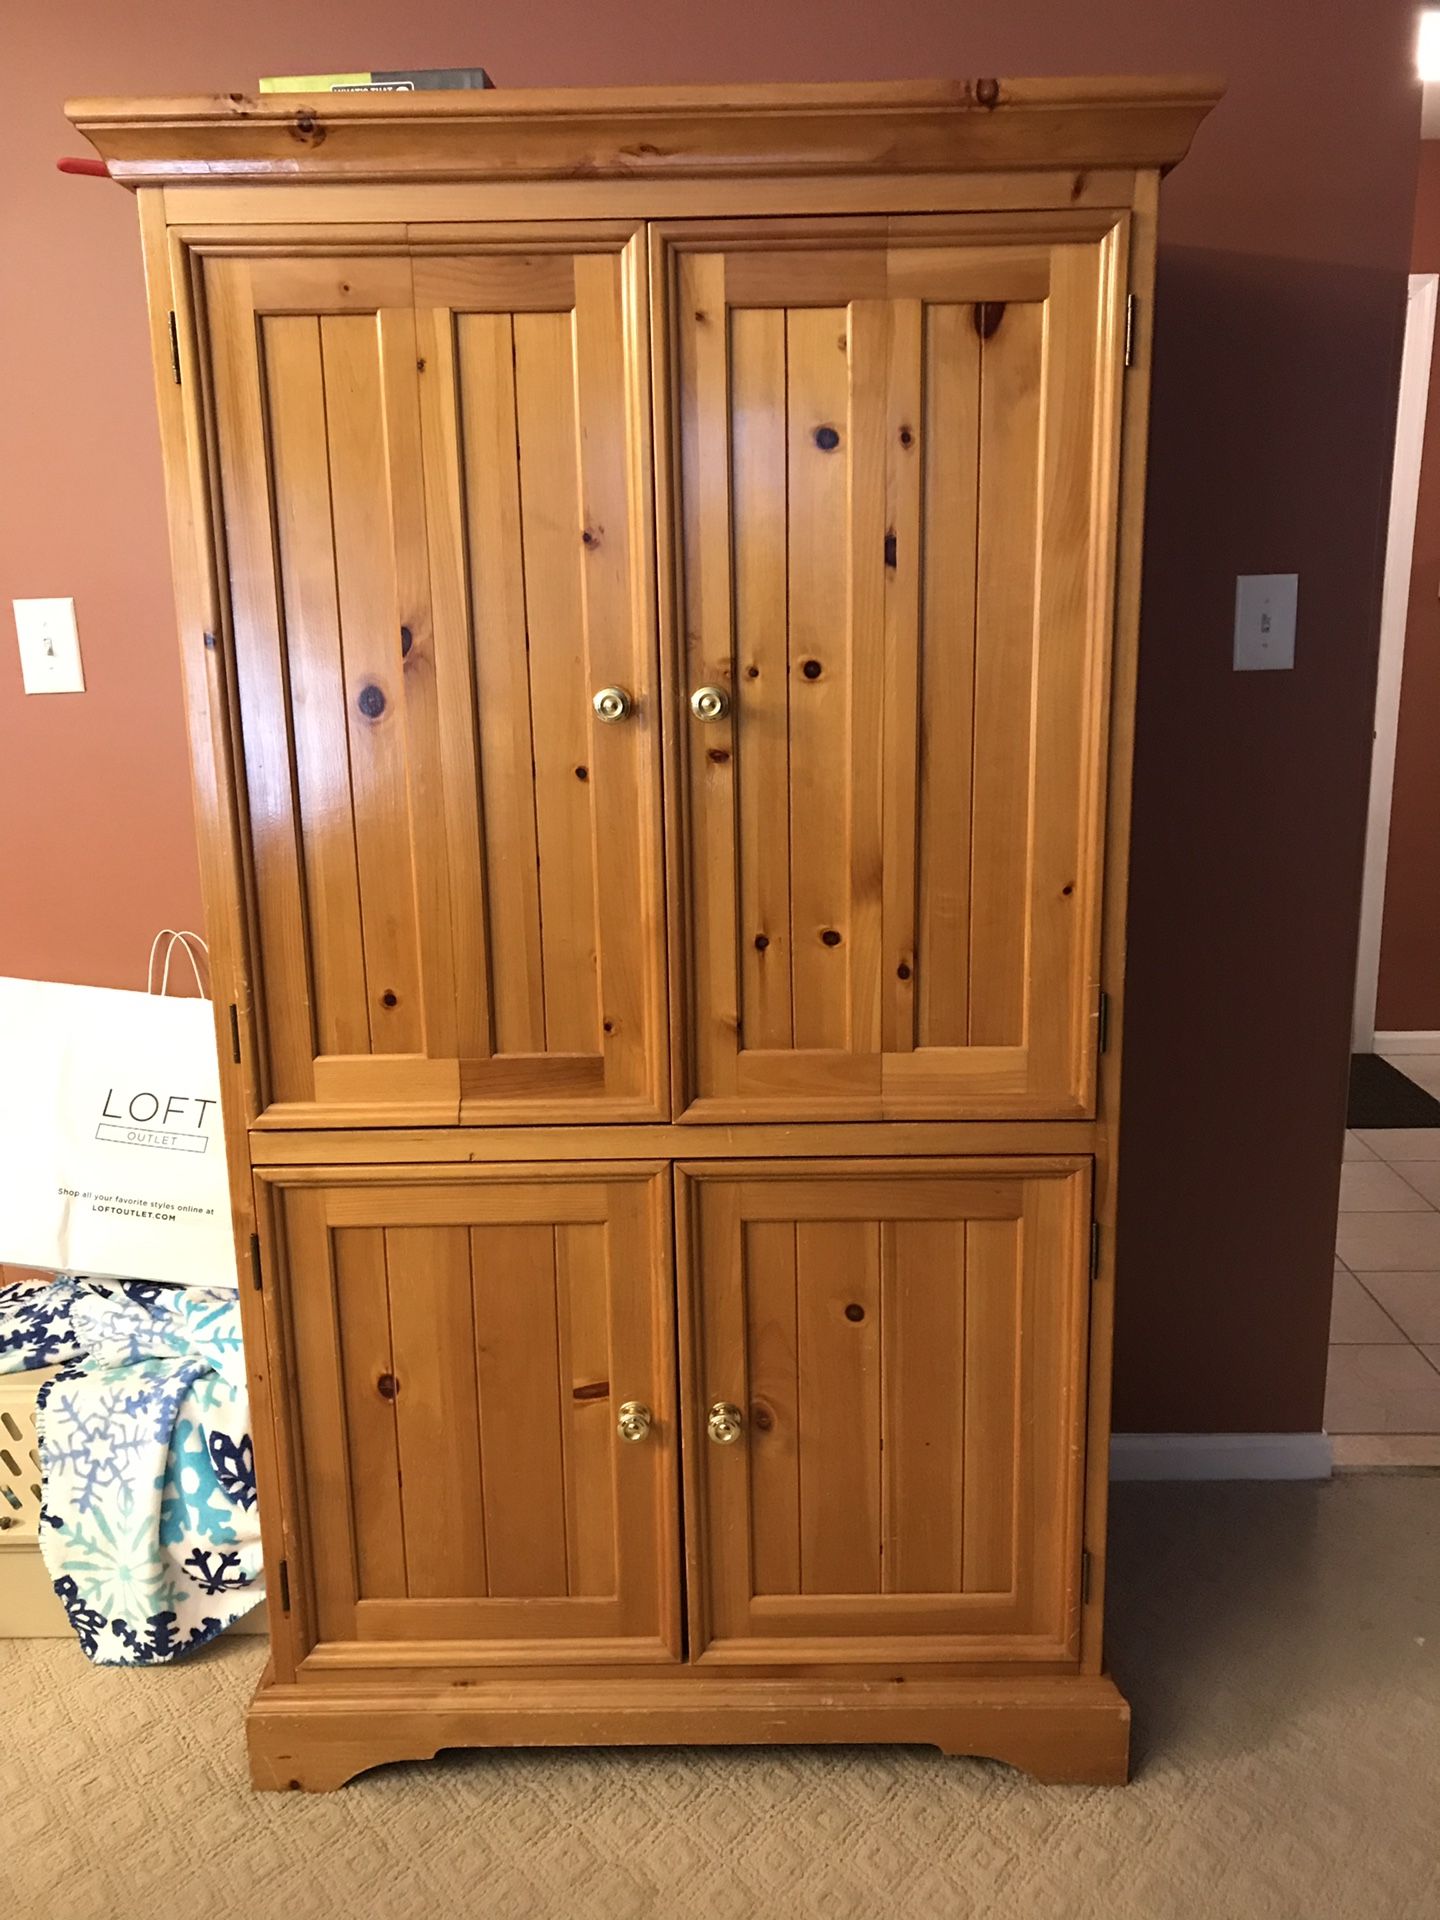 Free - pick up in Deptford ,Nj. This cabinet can be used for storage, computer desk or tv stand